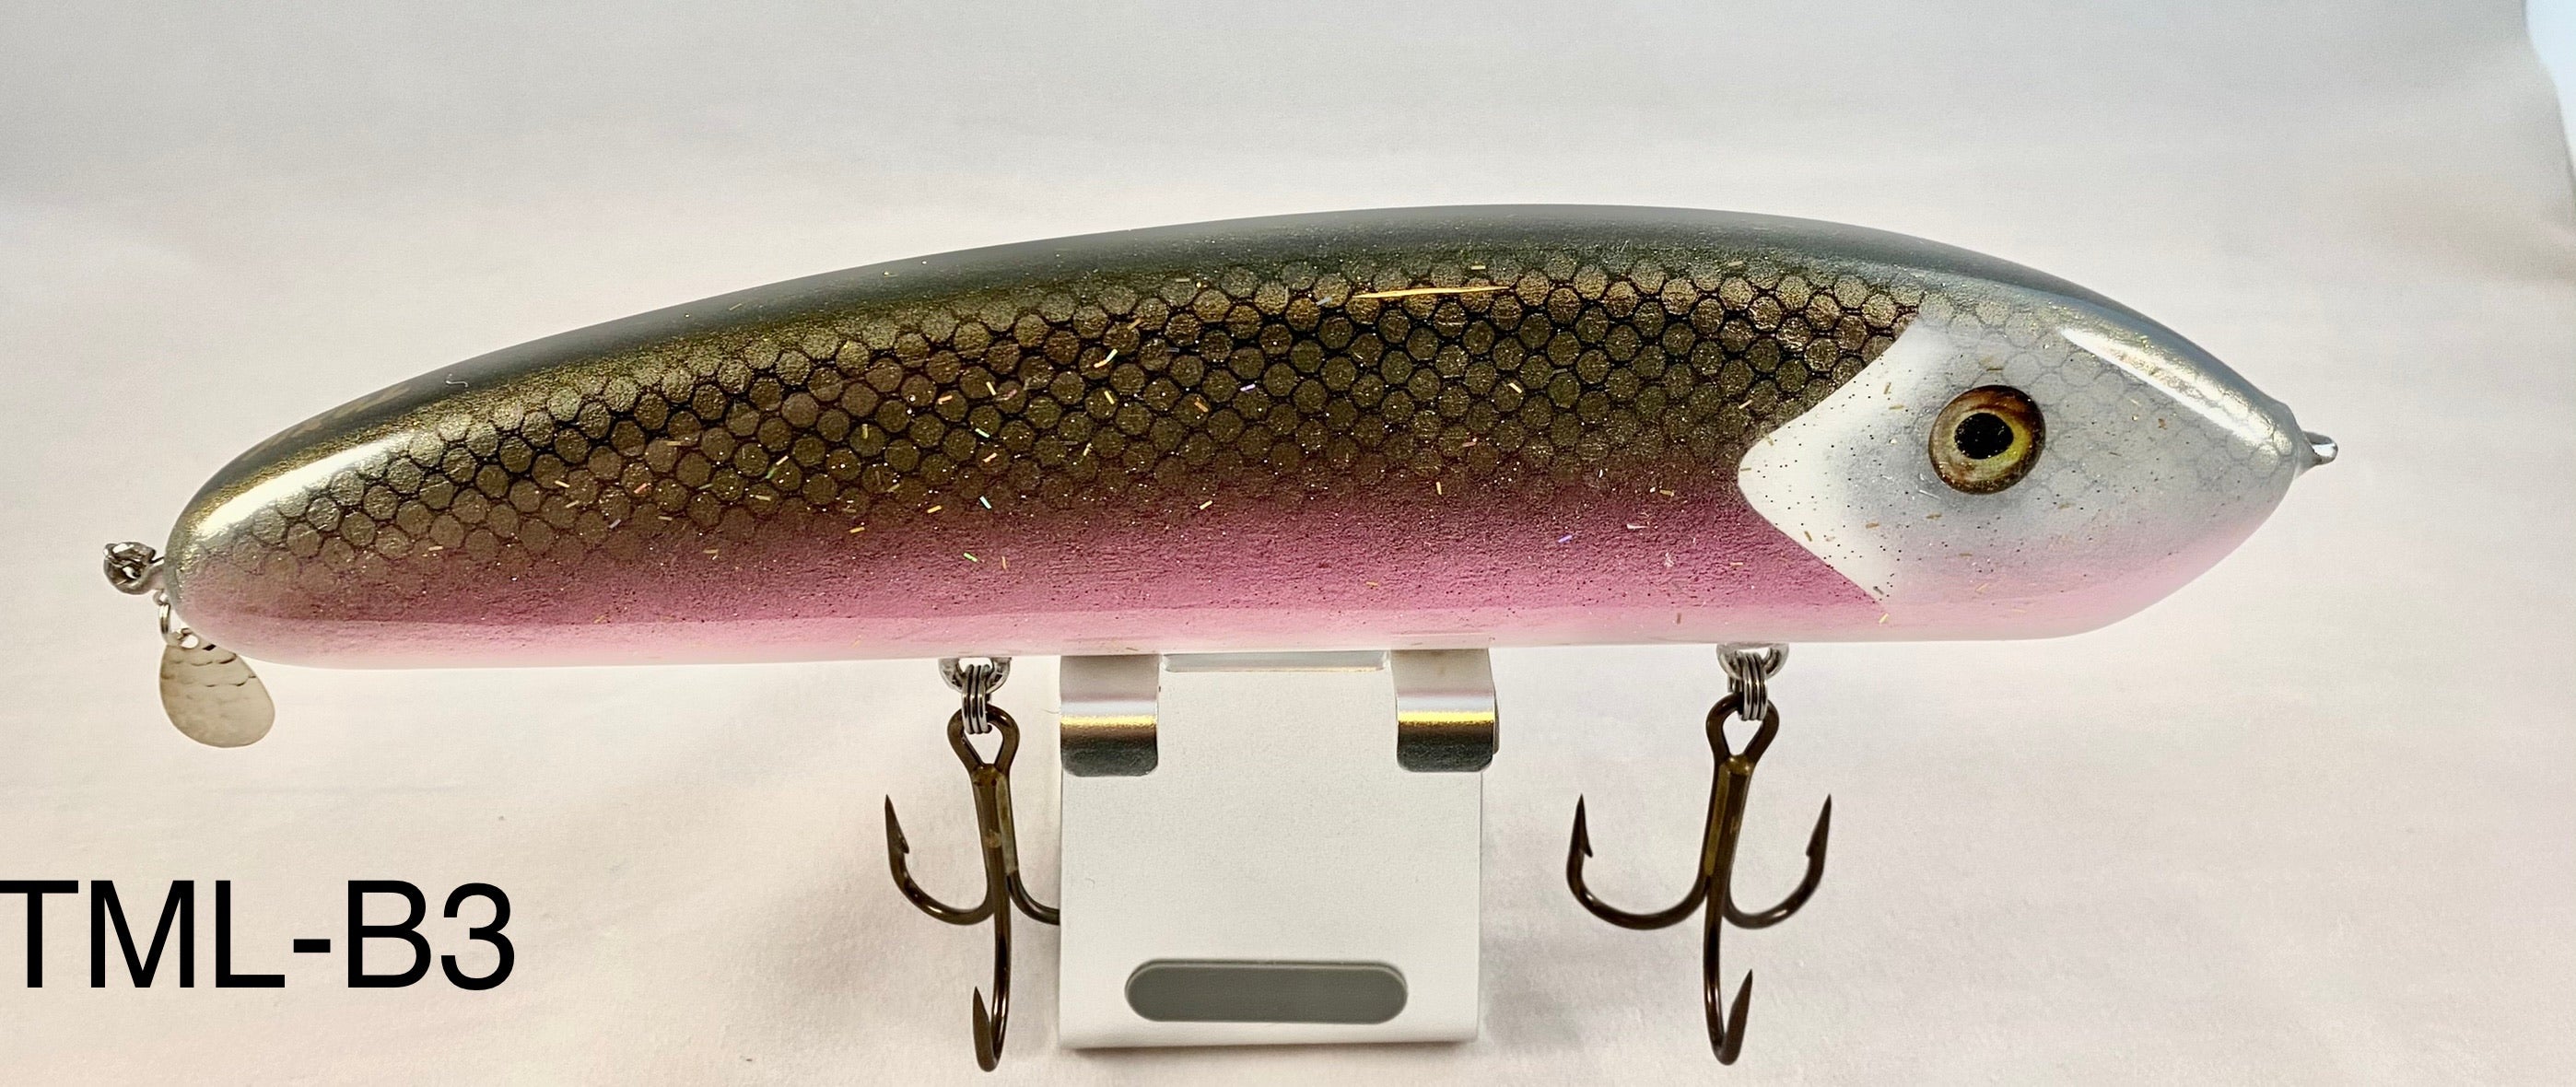 NEW MUSKY TACKLE For 2020!!! 